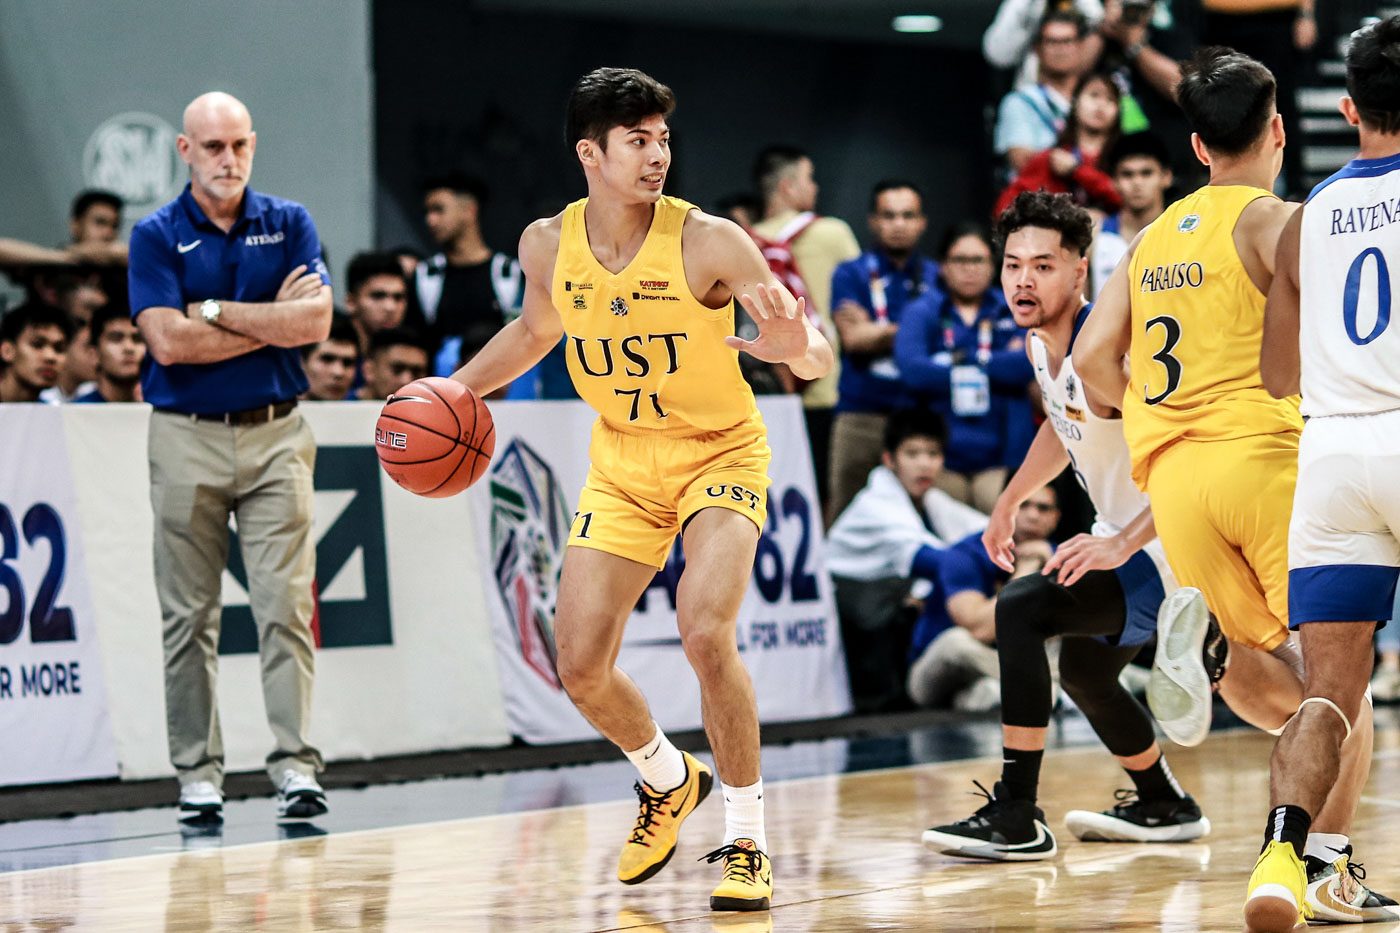 UAAP to crown general champion, but no Athletes of the Year